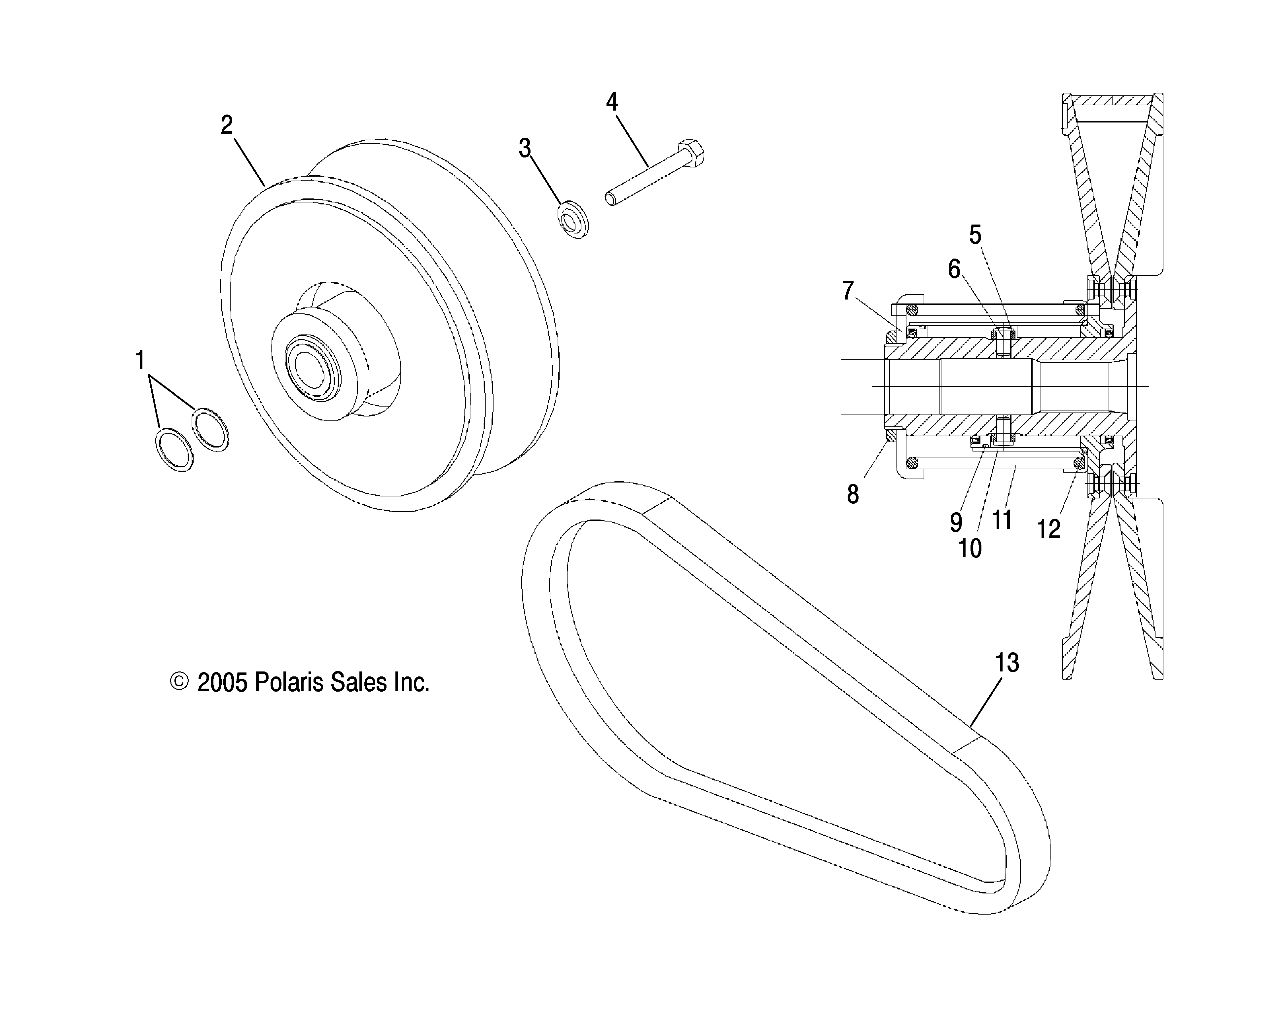 Part Number : 7043212 SPRING-DRIVEN CLUTCH